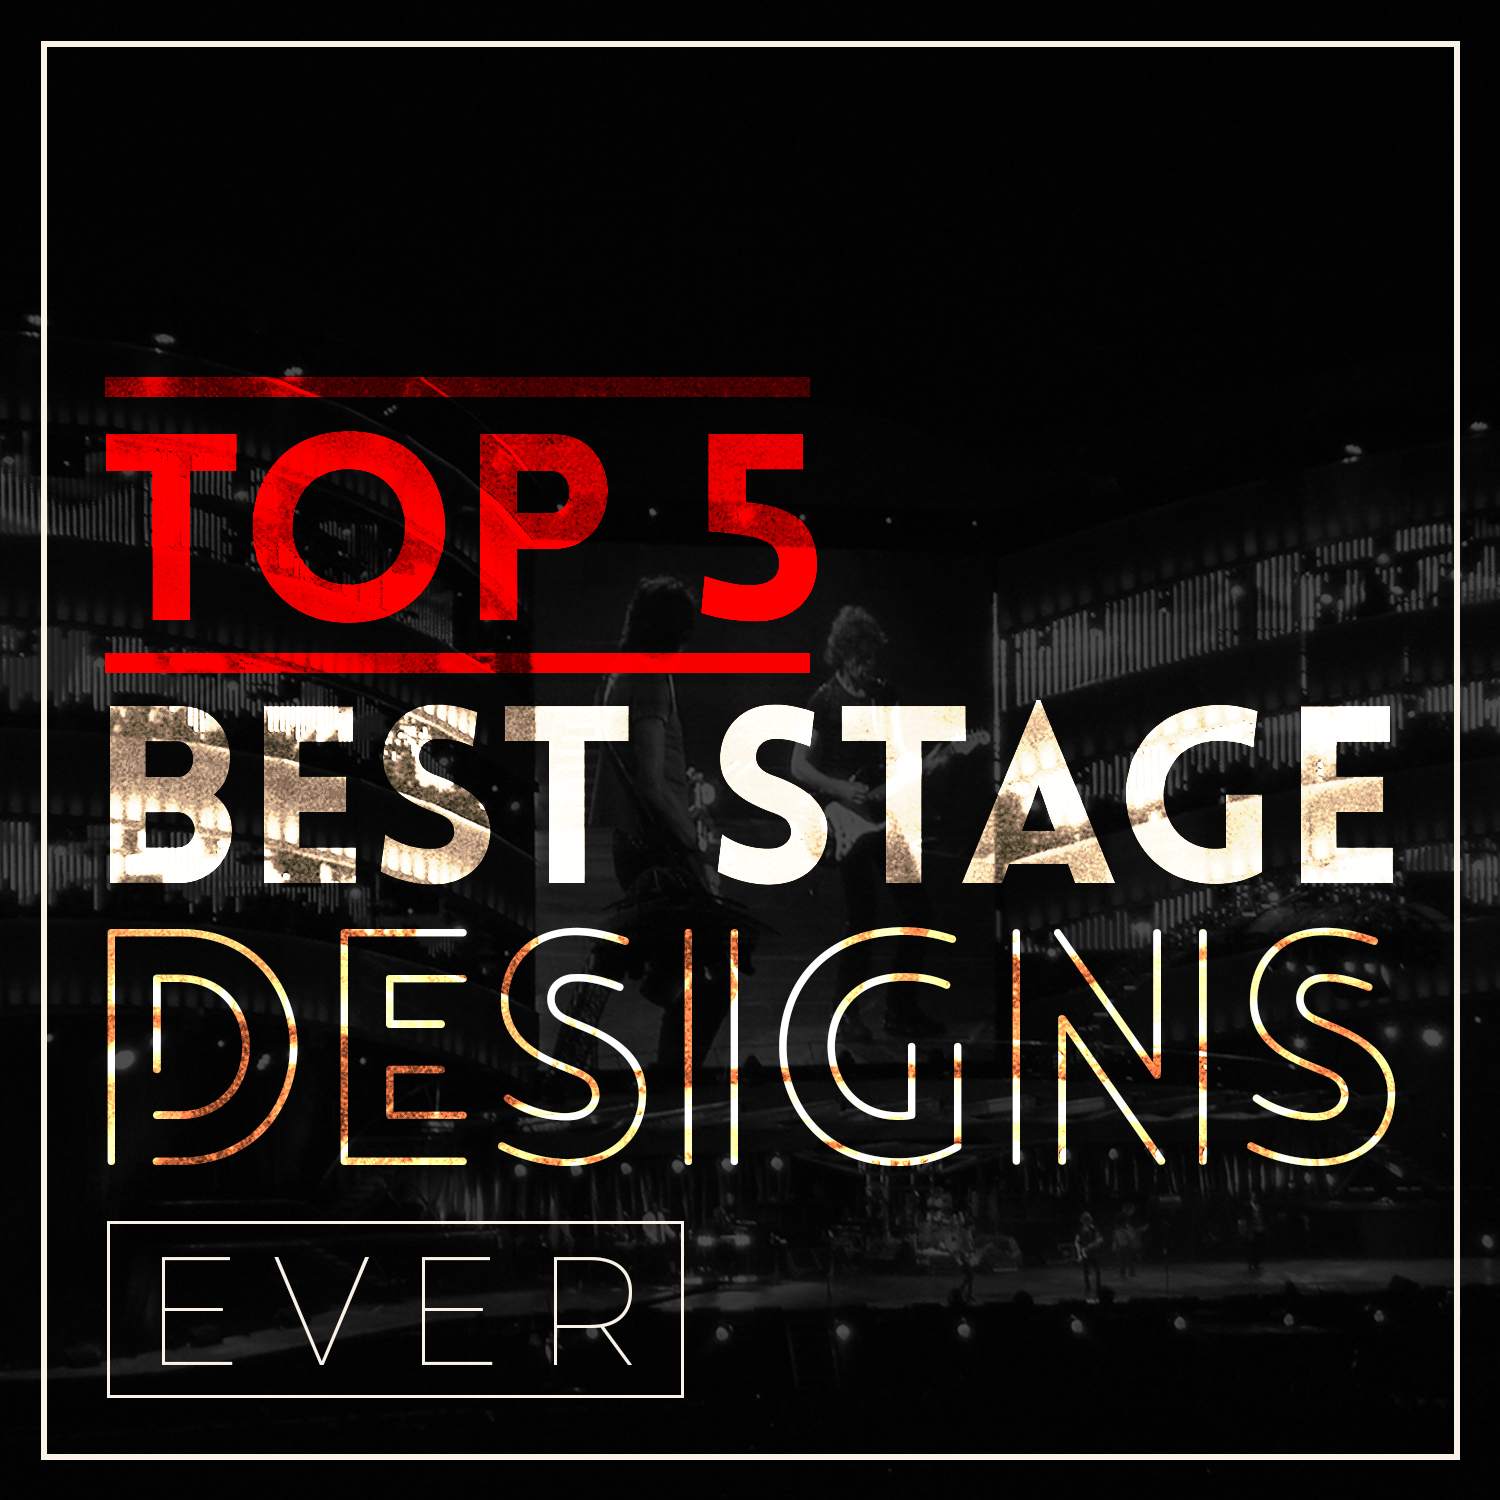 Top 5 Best Stage Designs Ever